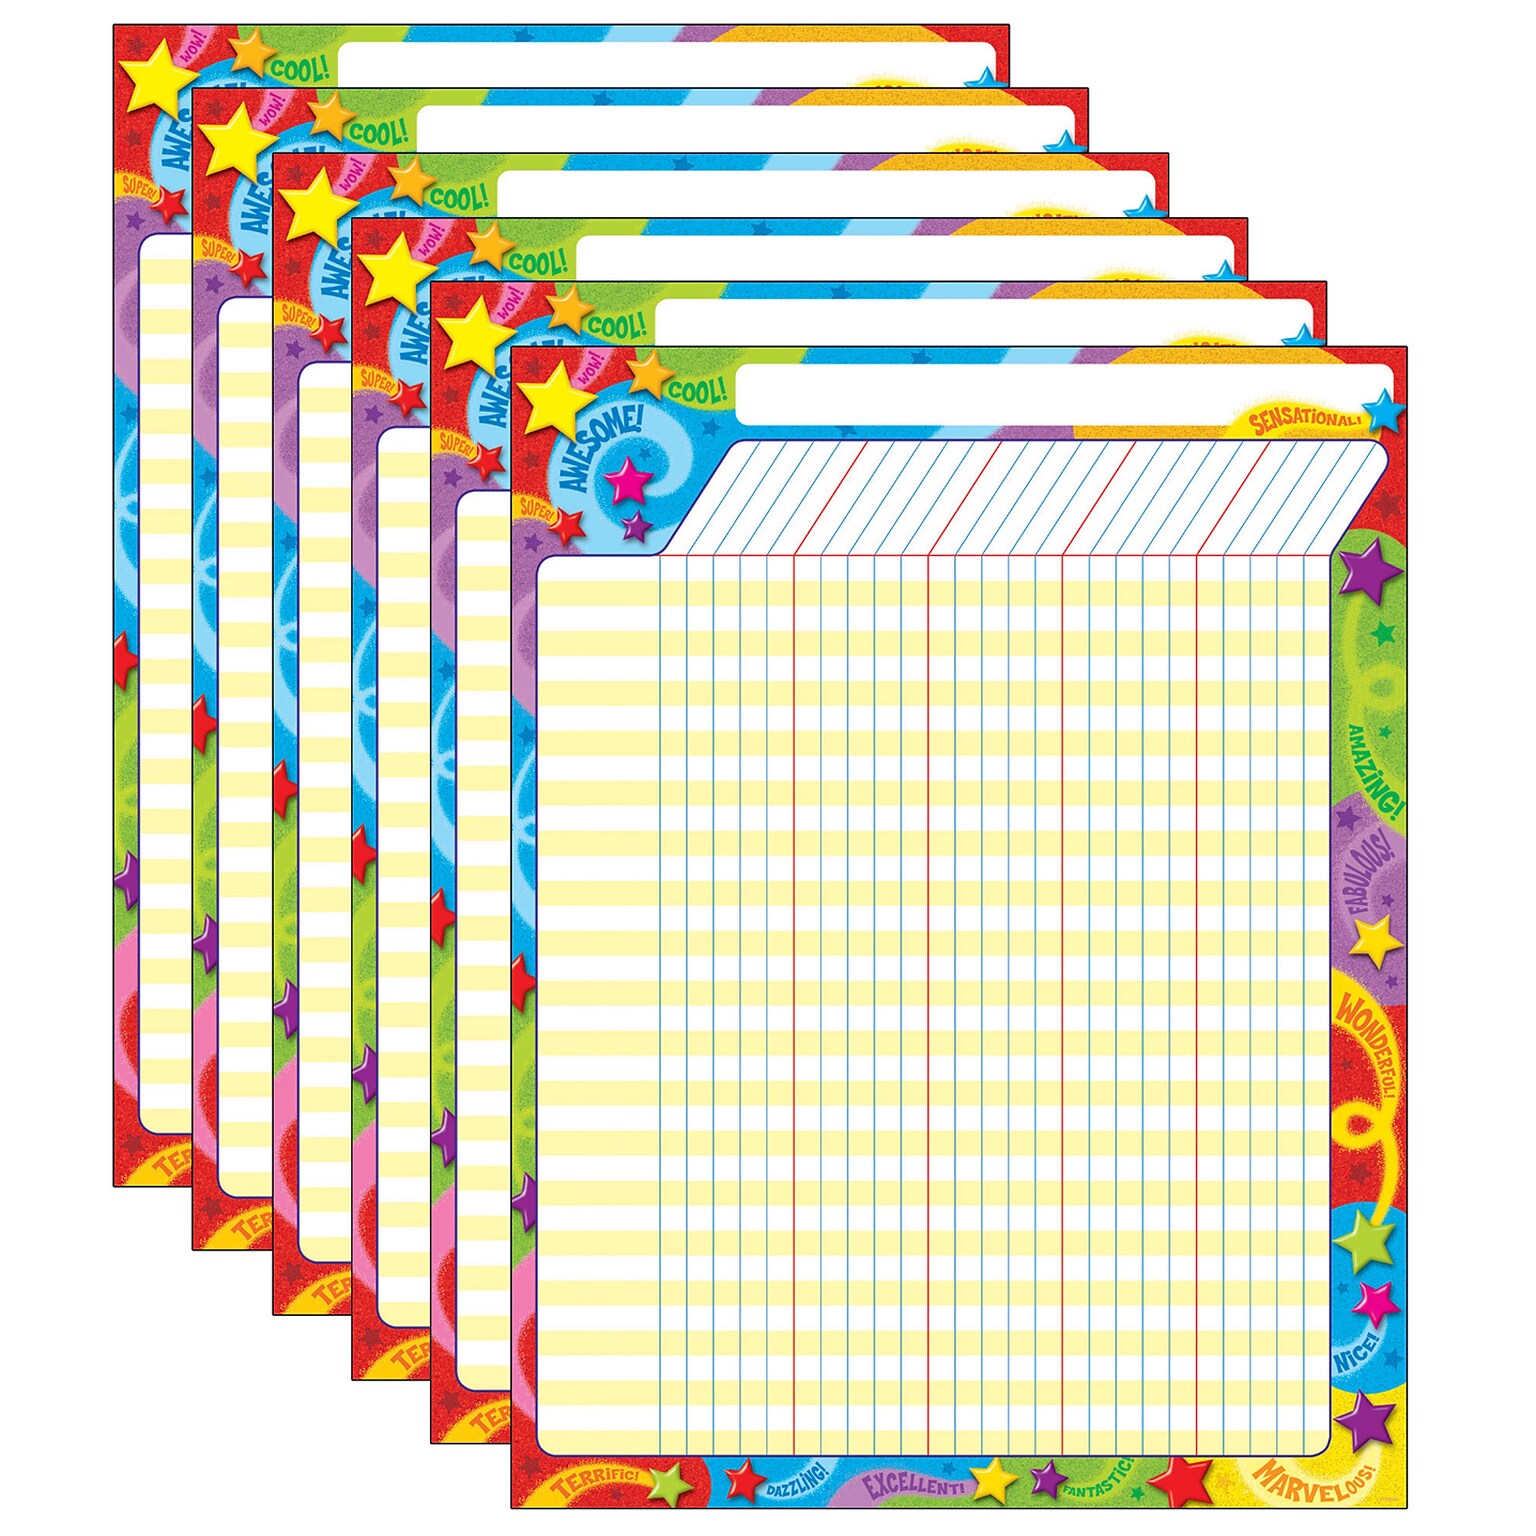 TREND Praise Words n Stars Incentive Chart, 17 x 22, Pack of 6 (T-73350-6)